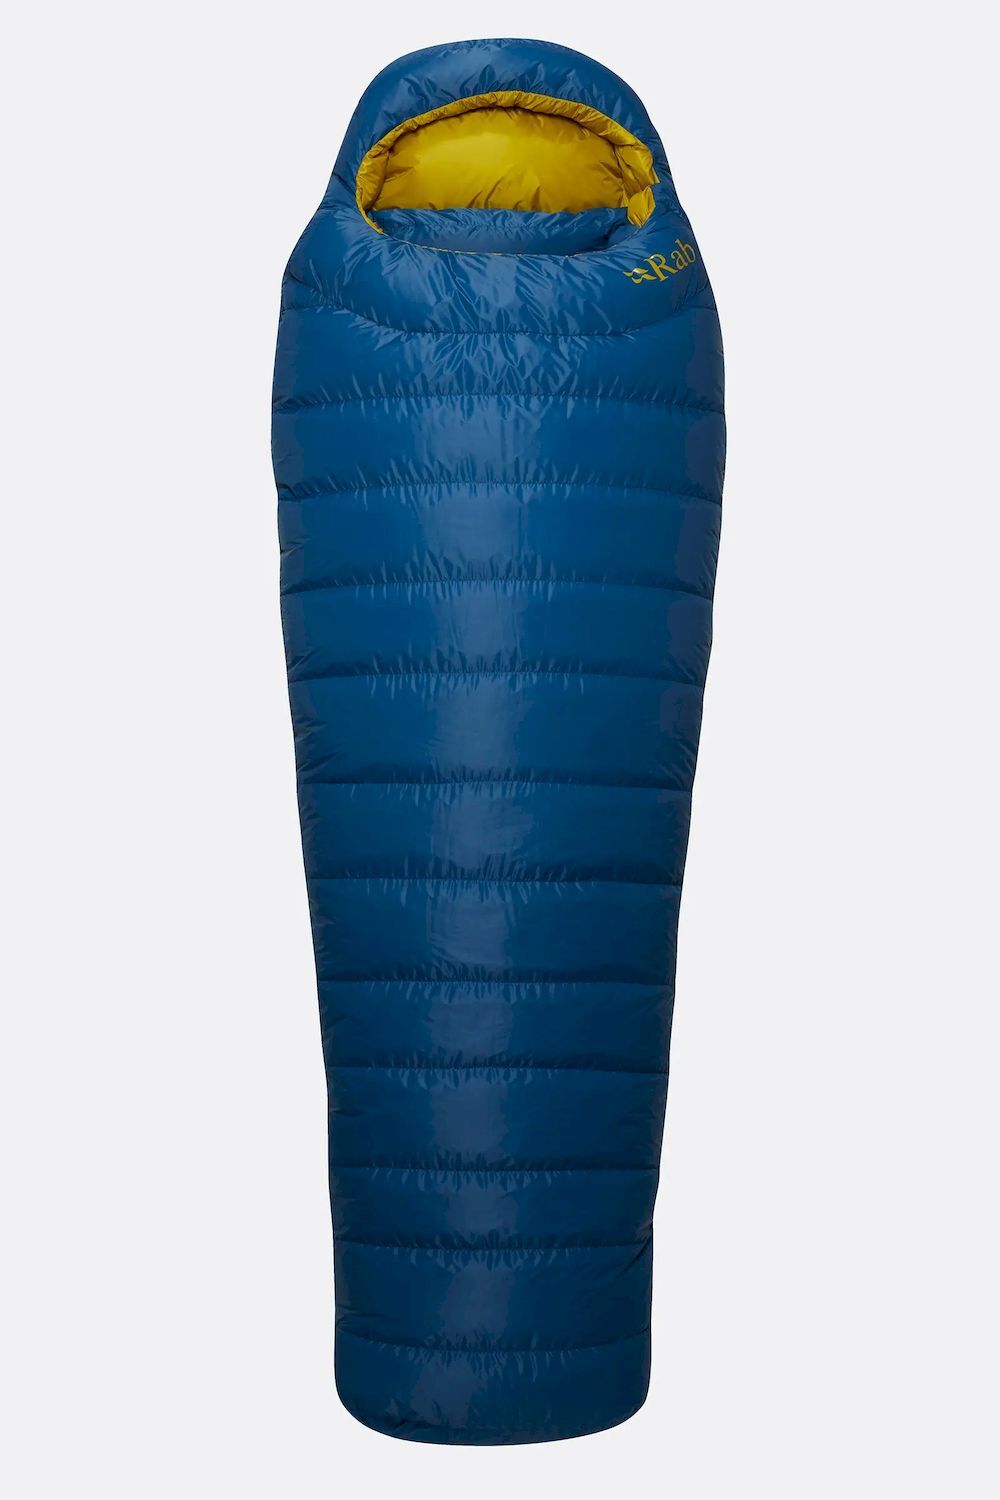 Rab Ascent Pro 600 - Schlafsack - 0